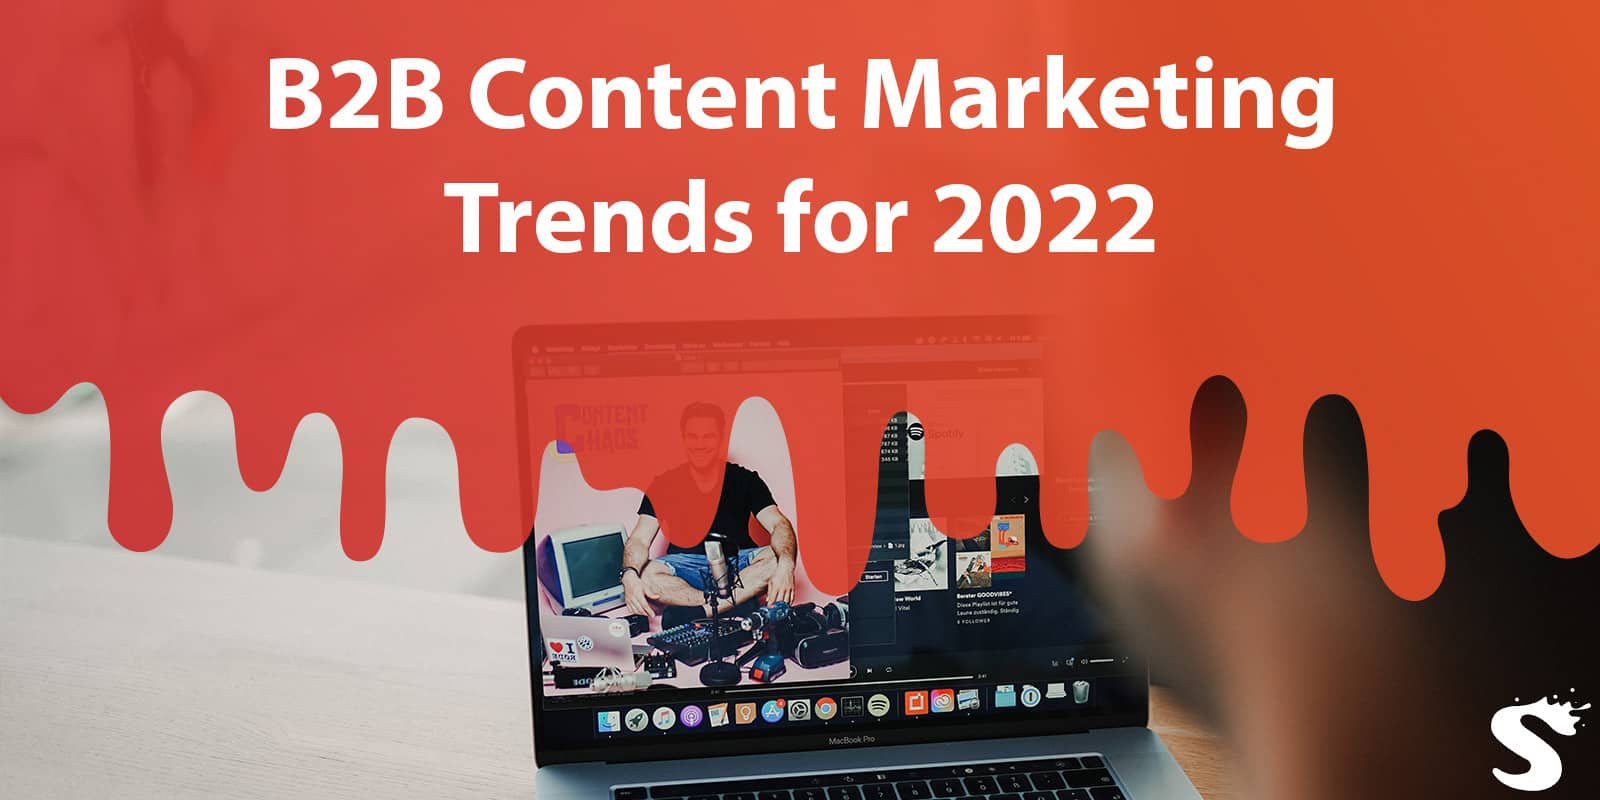 B2B Content Marketing Trends for 2022